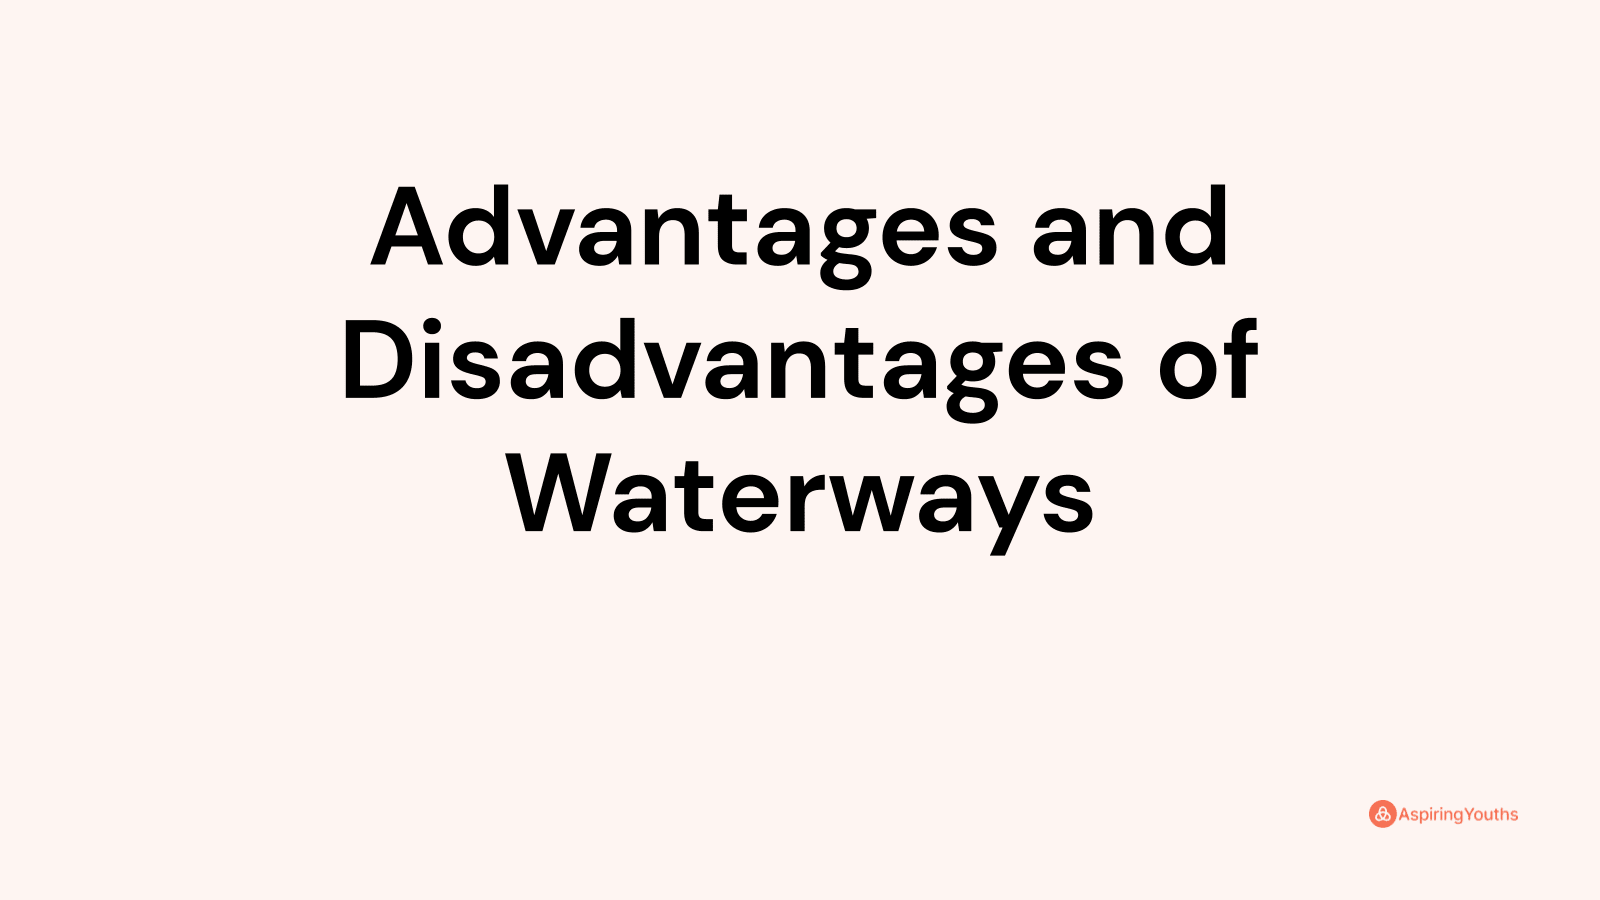 Advantages and disadvantages of Waterways